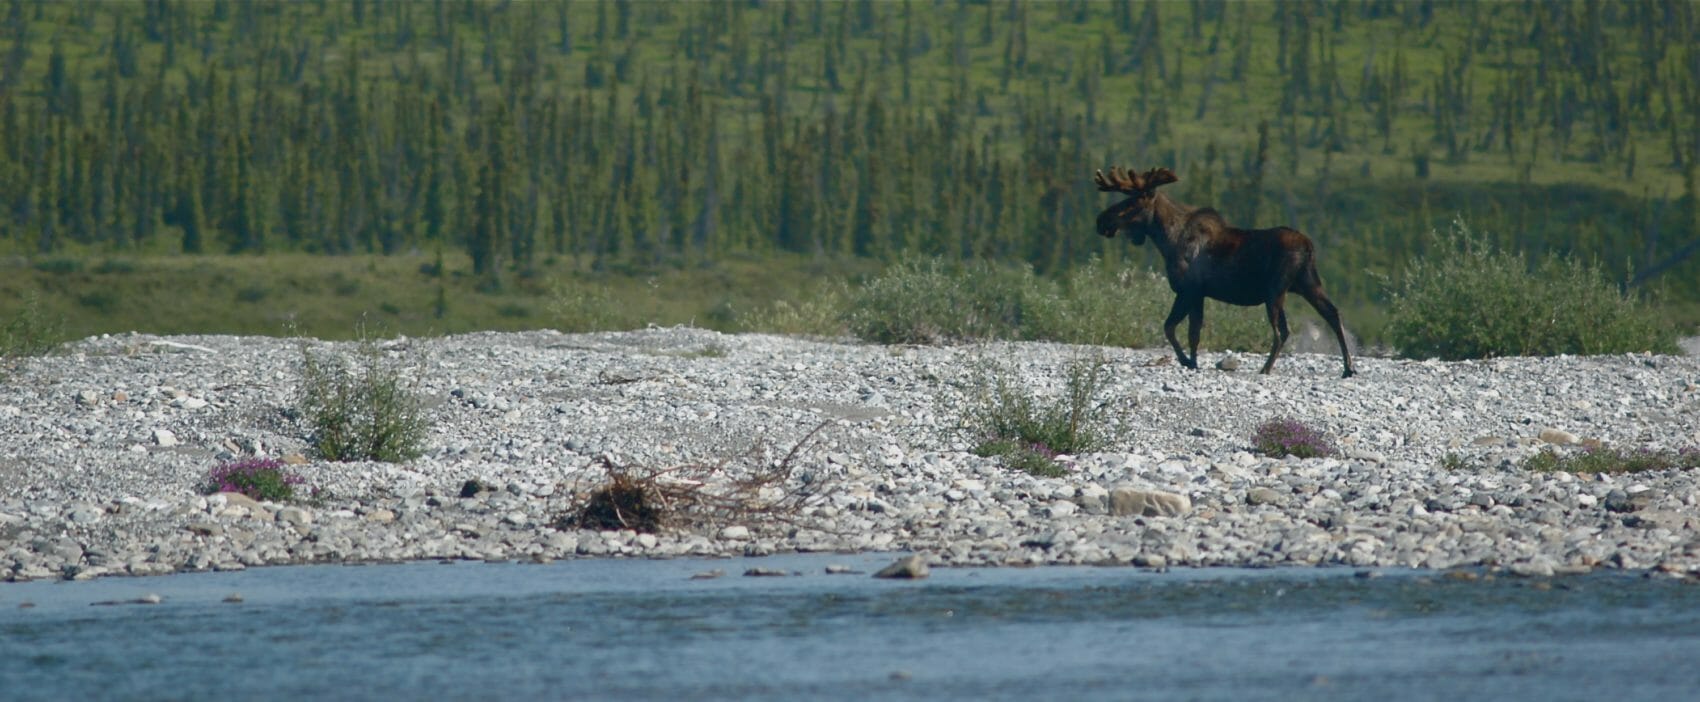 moose on the firth river in the arctic